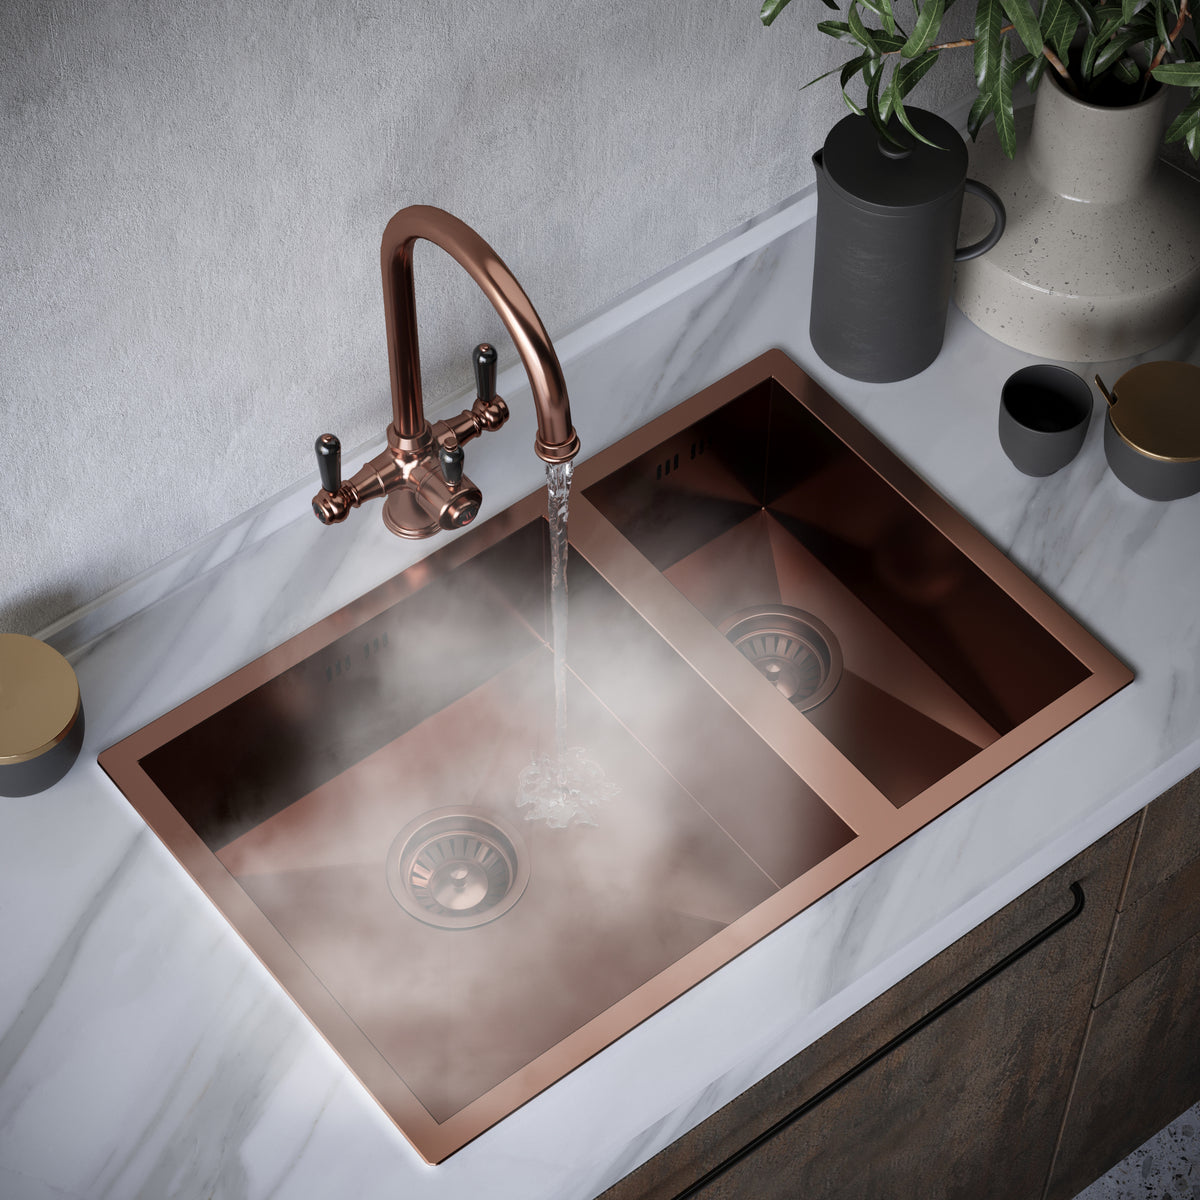 Wodar Stainless Steel 1.5 Bowl - Brushed Copper